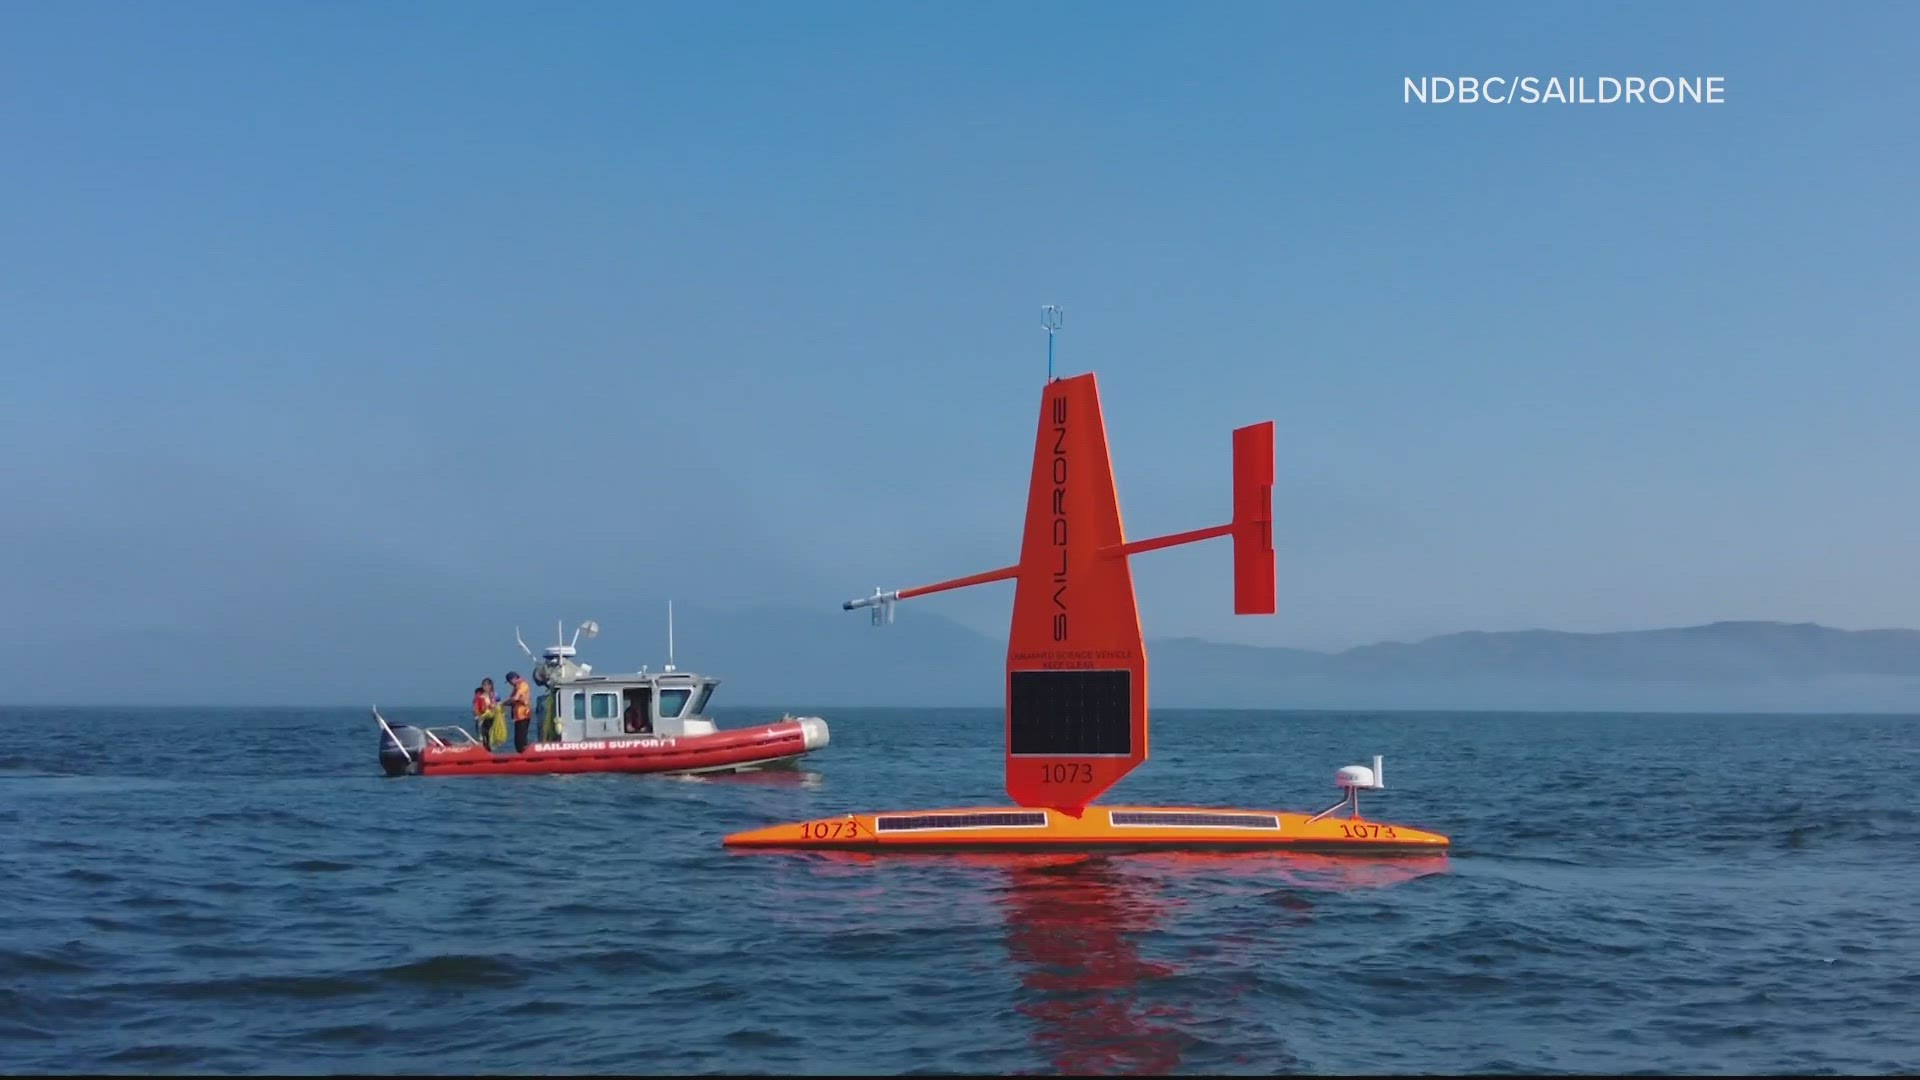 Here's how the new saildrones work and how they are better for the environment